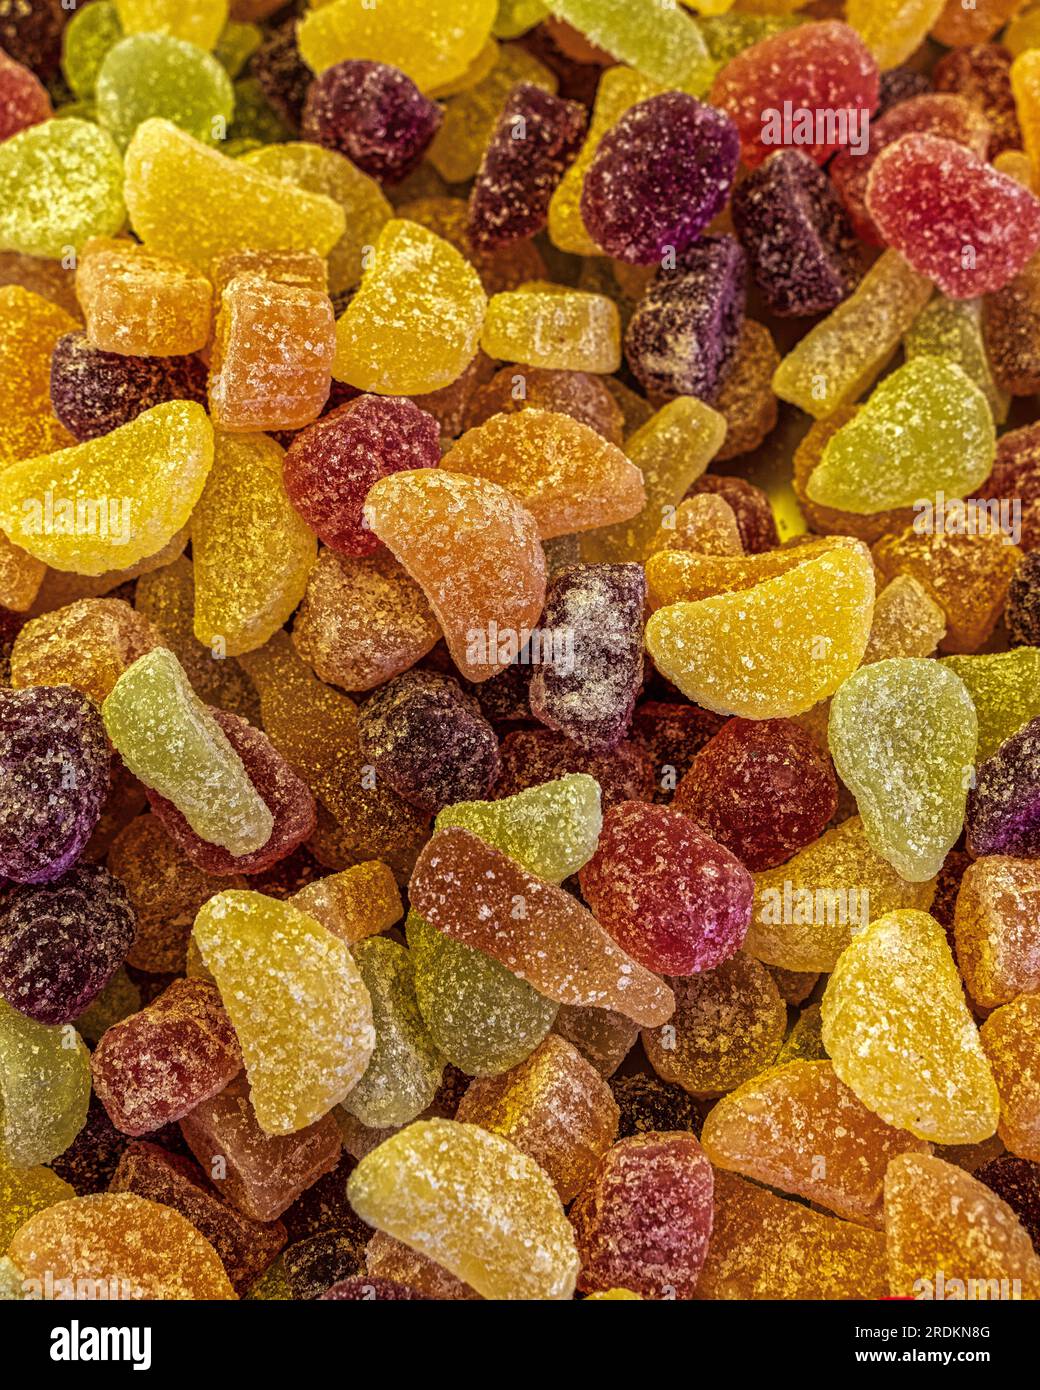 Assorted and colorful candies in the market stalls Stock Photo